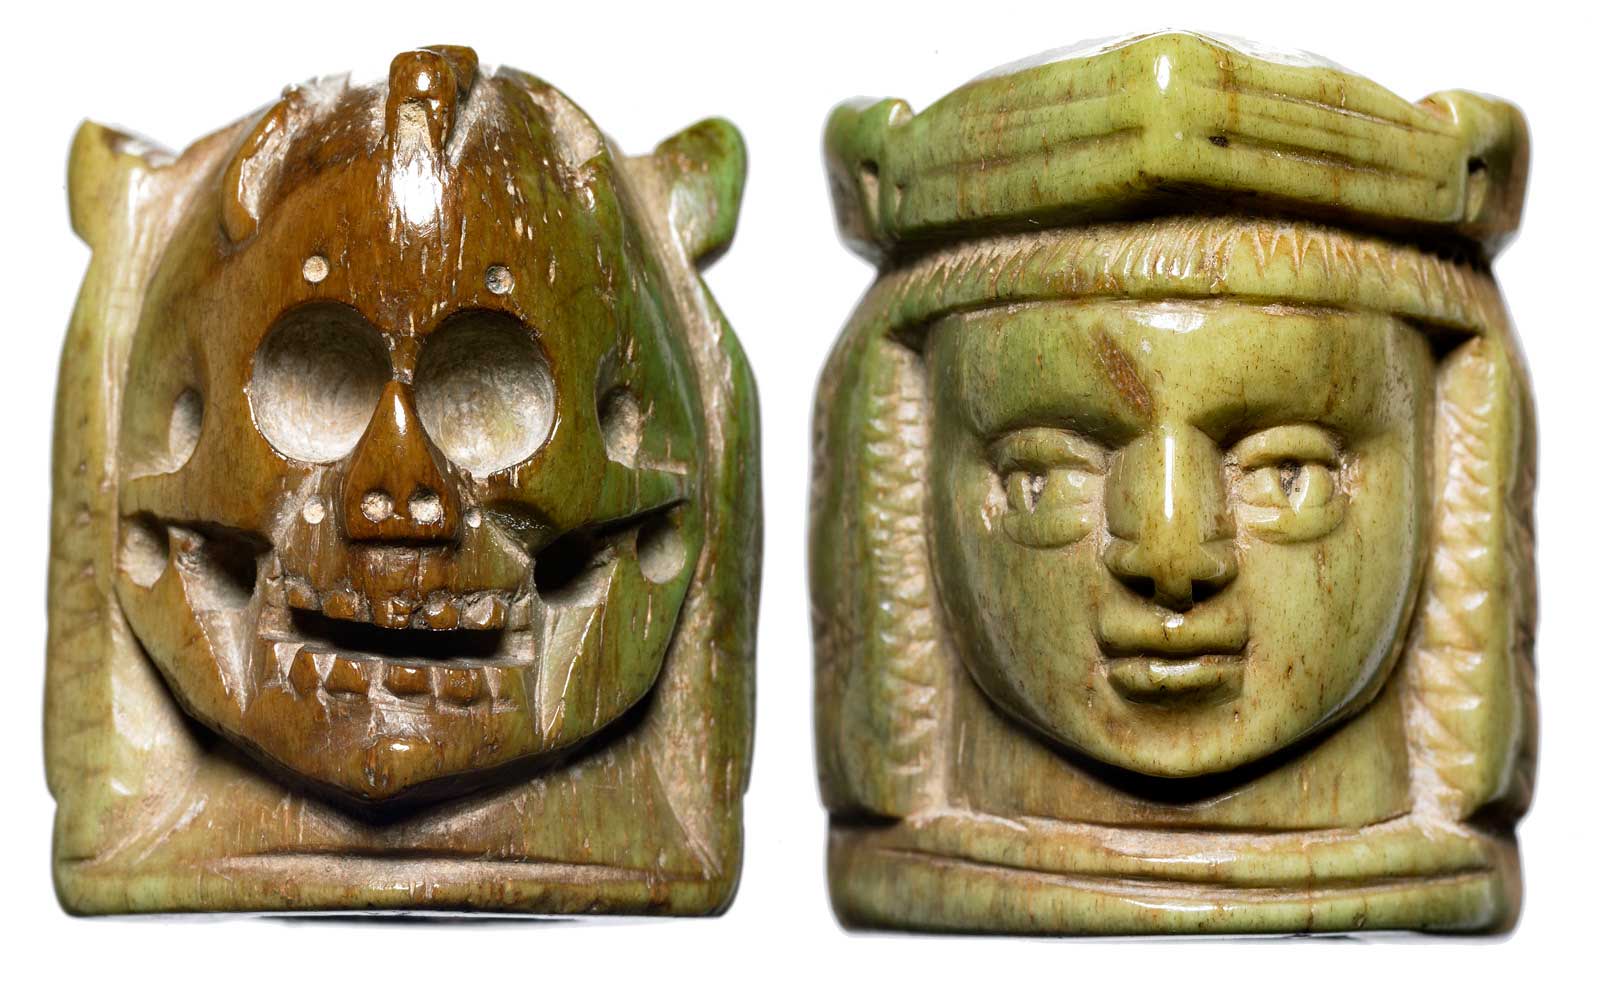 Two sides of a medieval rosary bead, designed with a face on one side and a skull on the other.